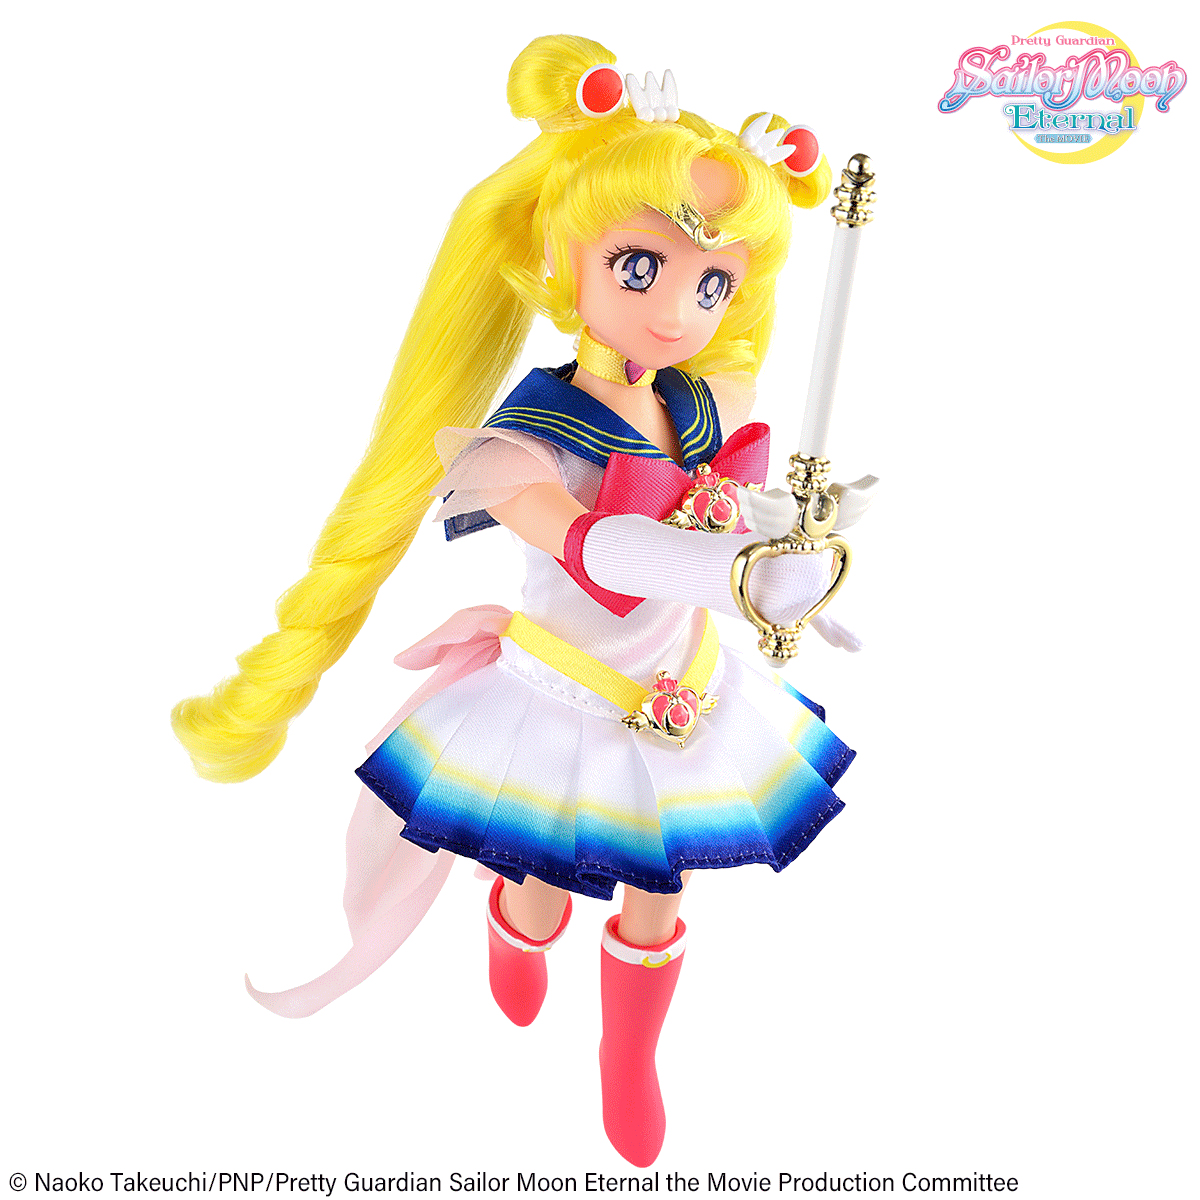 Who is Sailor Cosmos?